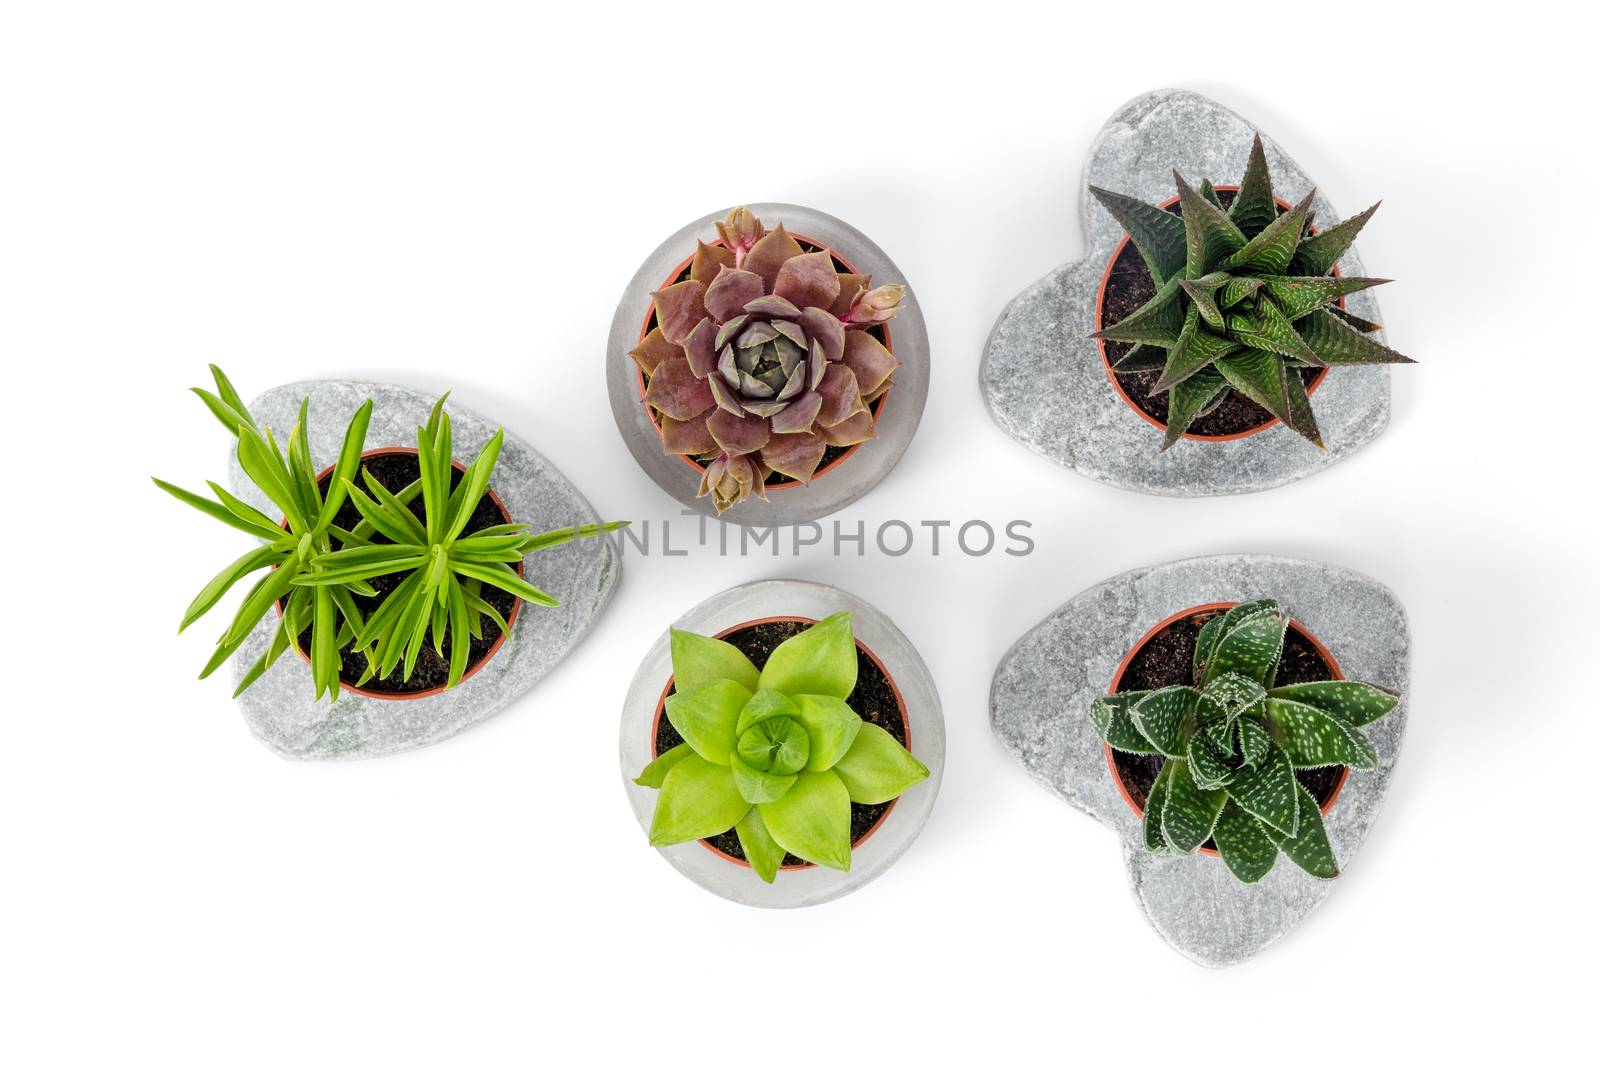 Variety of succulents in concrete planters by anikasalsera